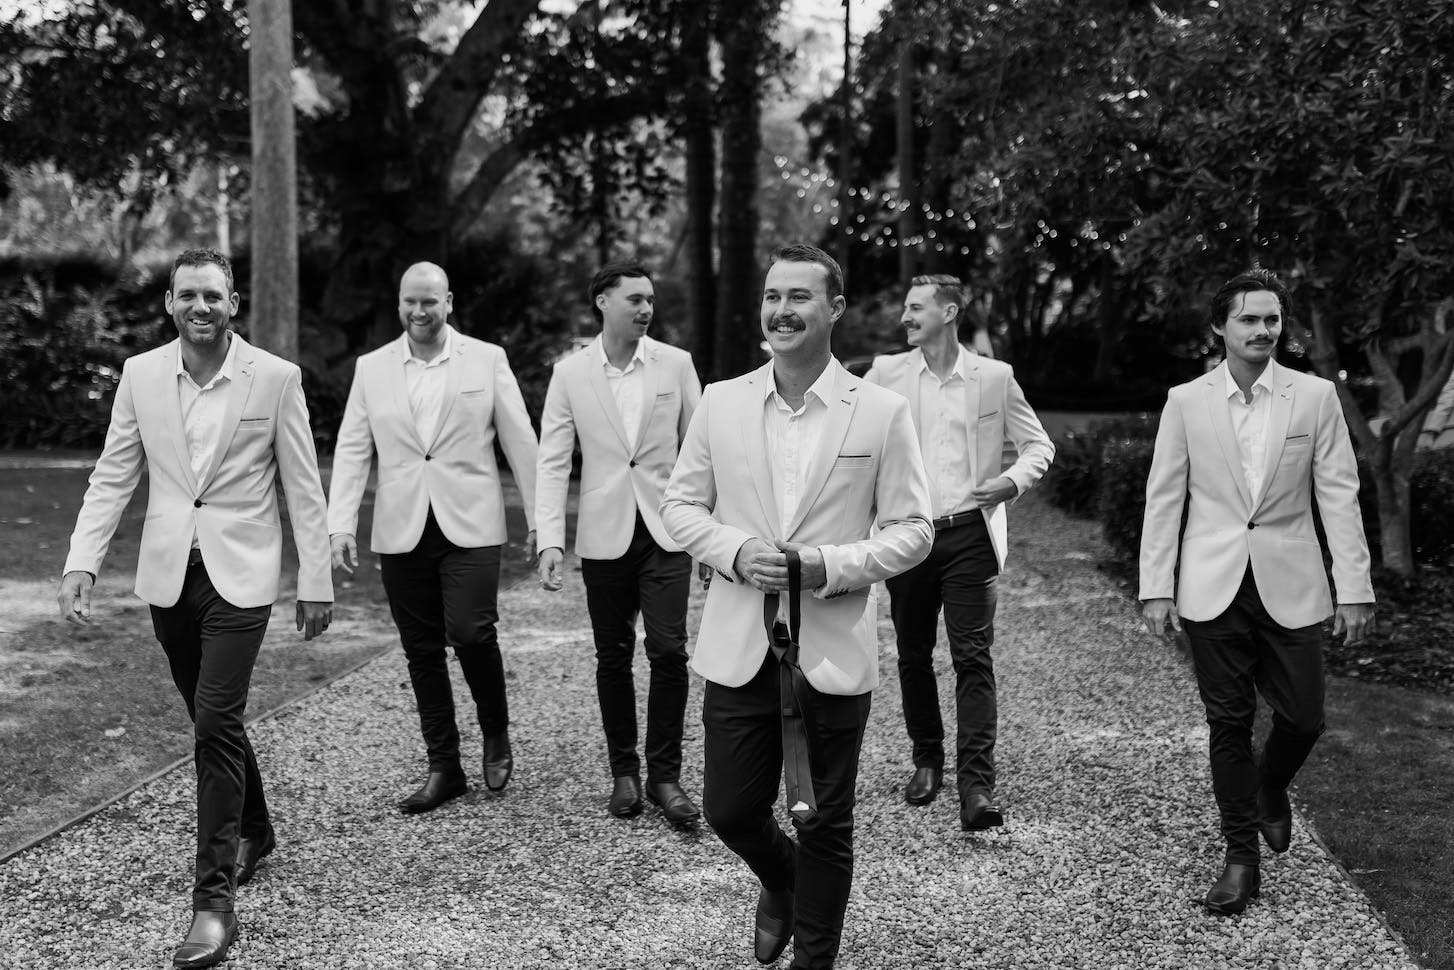 A black and white photo of six men walking on a gravel path outdoors, surrounded by trees. They are dressed in light-colored blazers and dark pants, with the man in the center holding a champagne bottle. The group appears to be smiling and enjoying the moment.